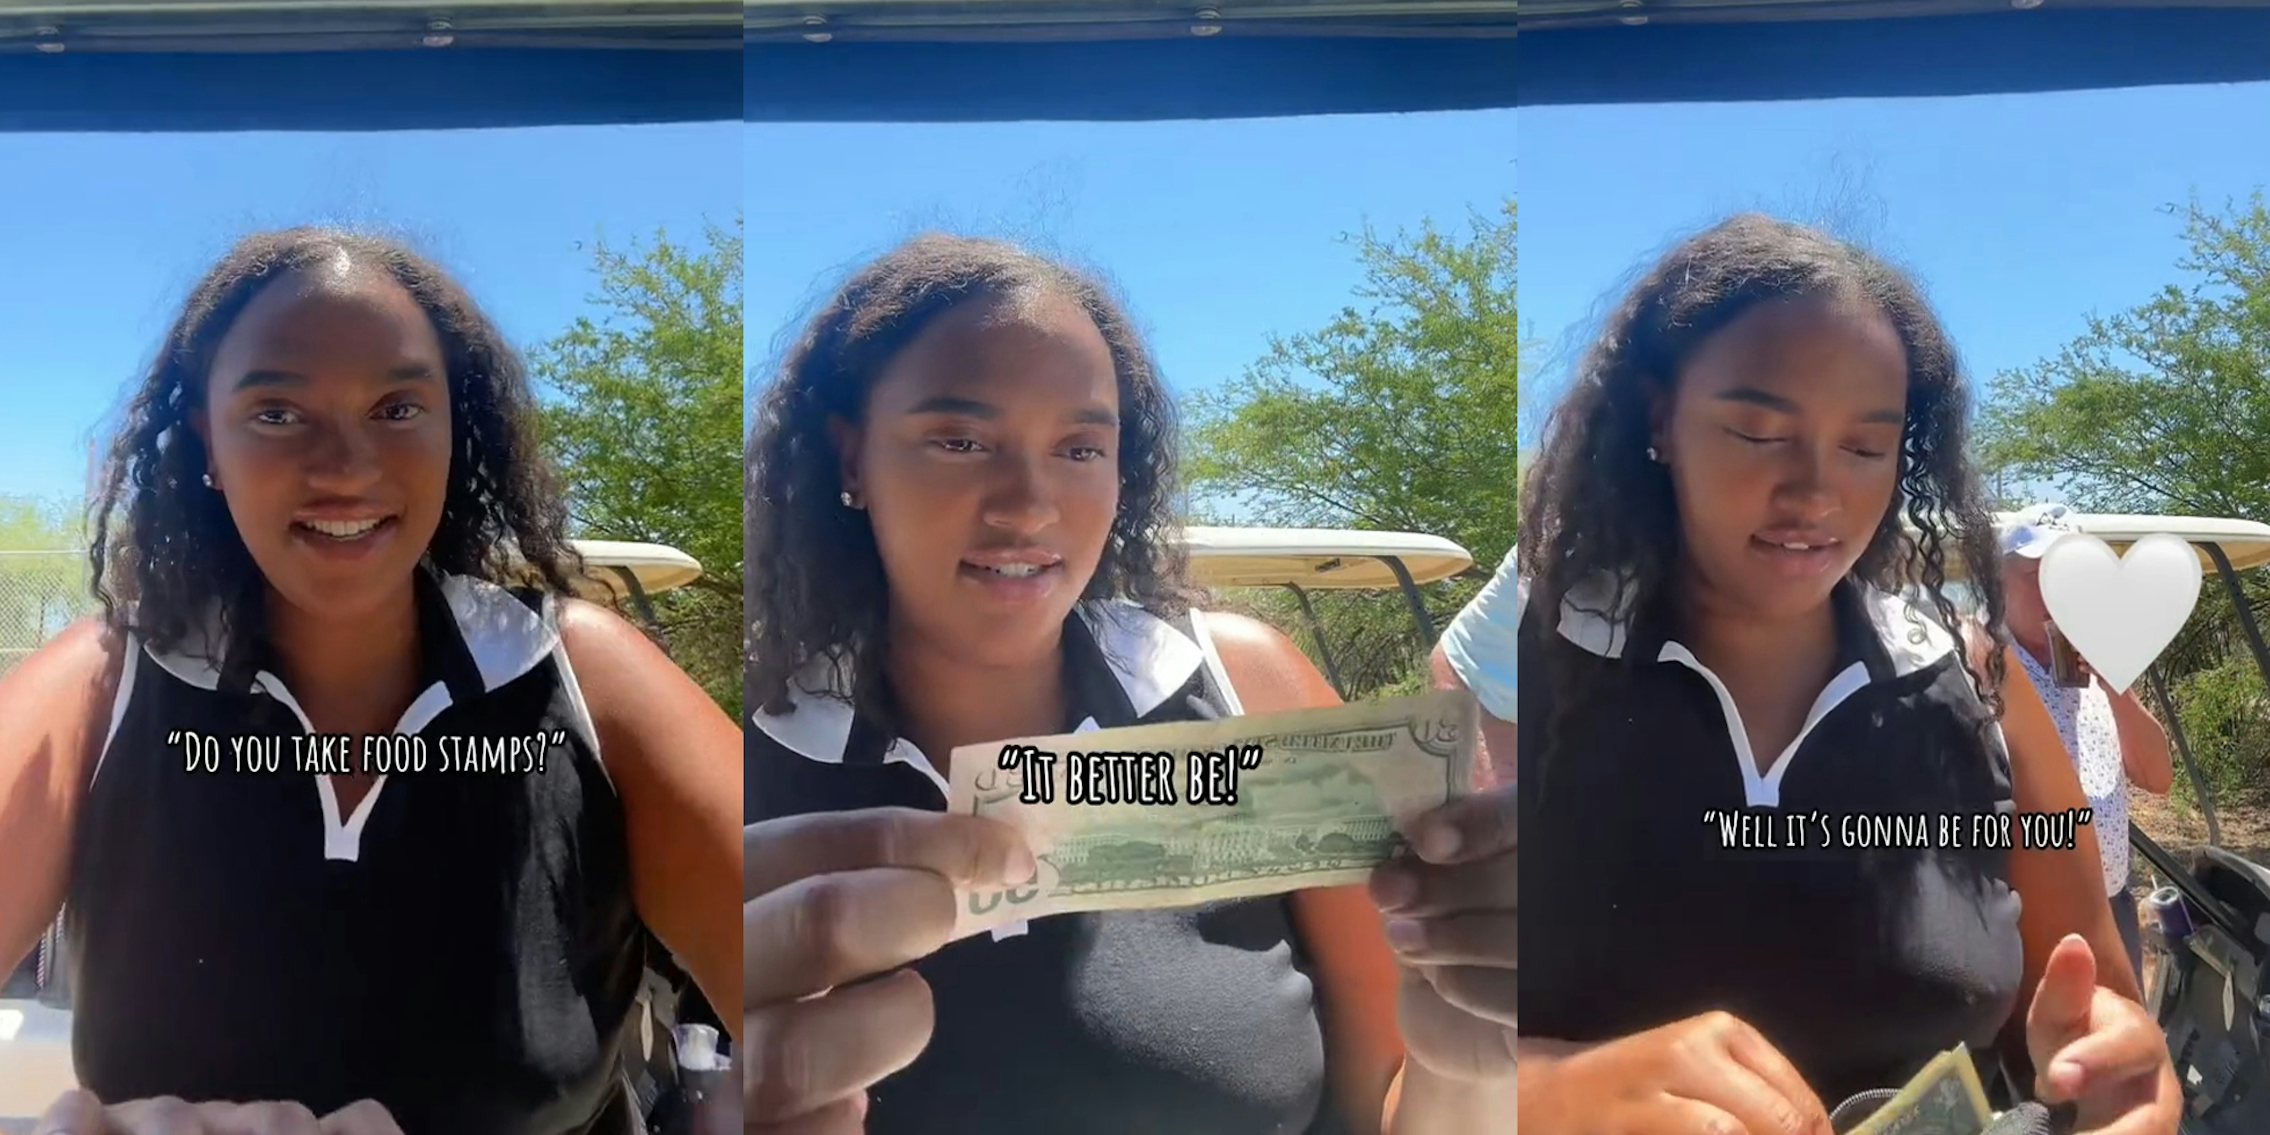 Black golf cart drink server gets asked if she takes ‘food stamps’ by white golfer